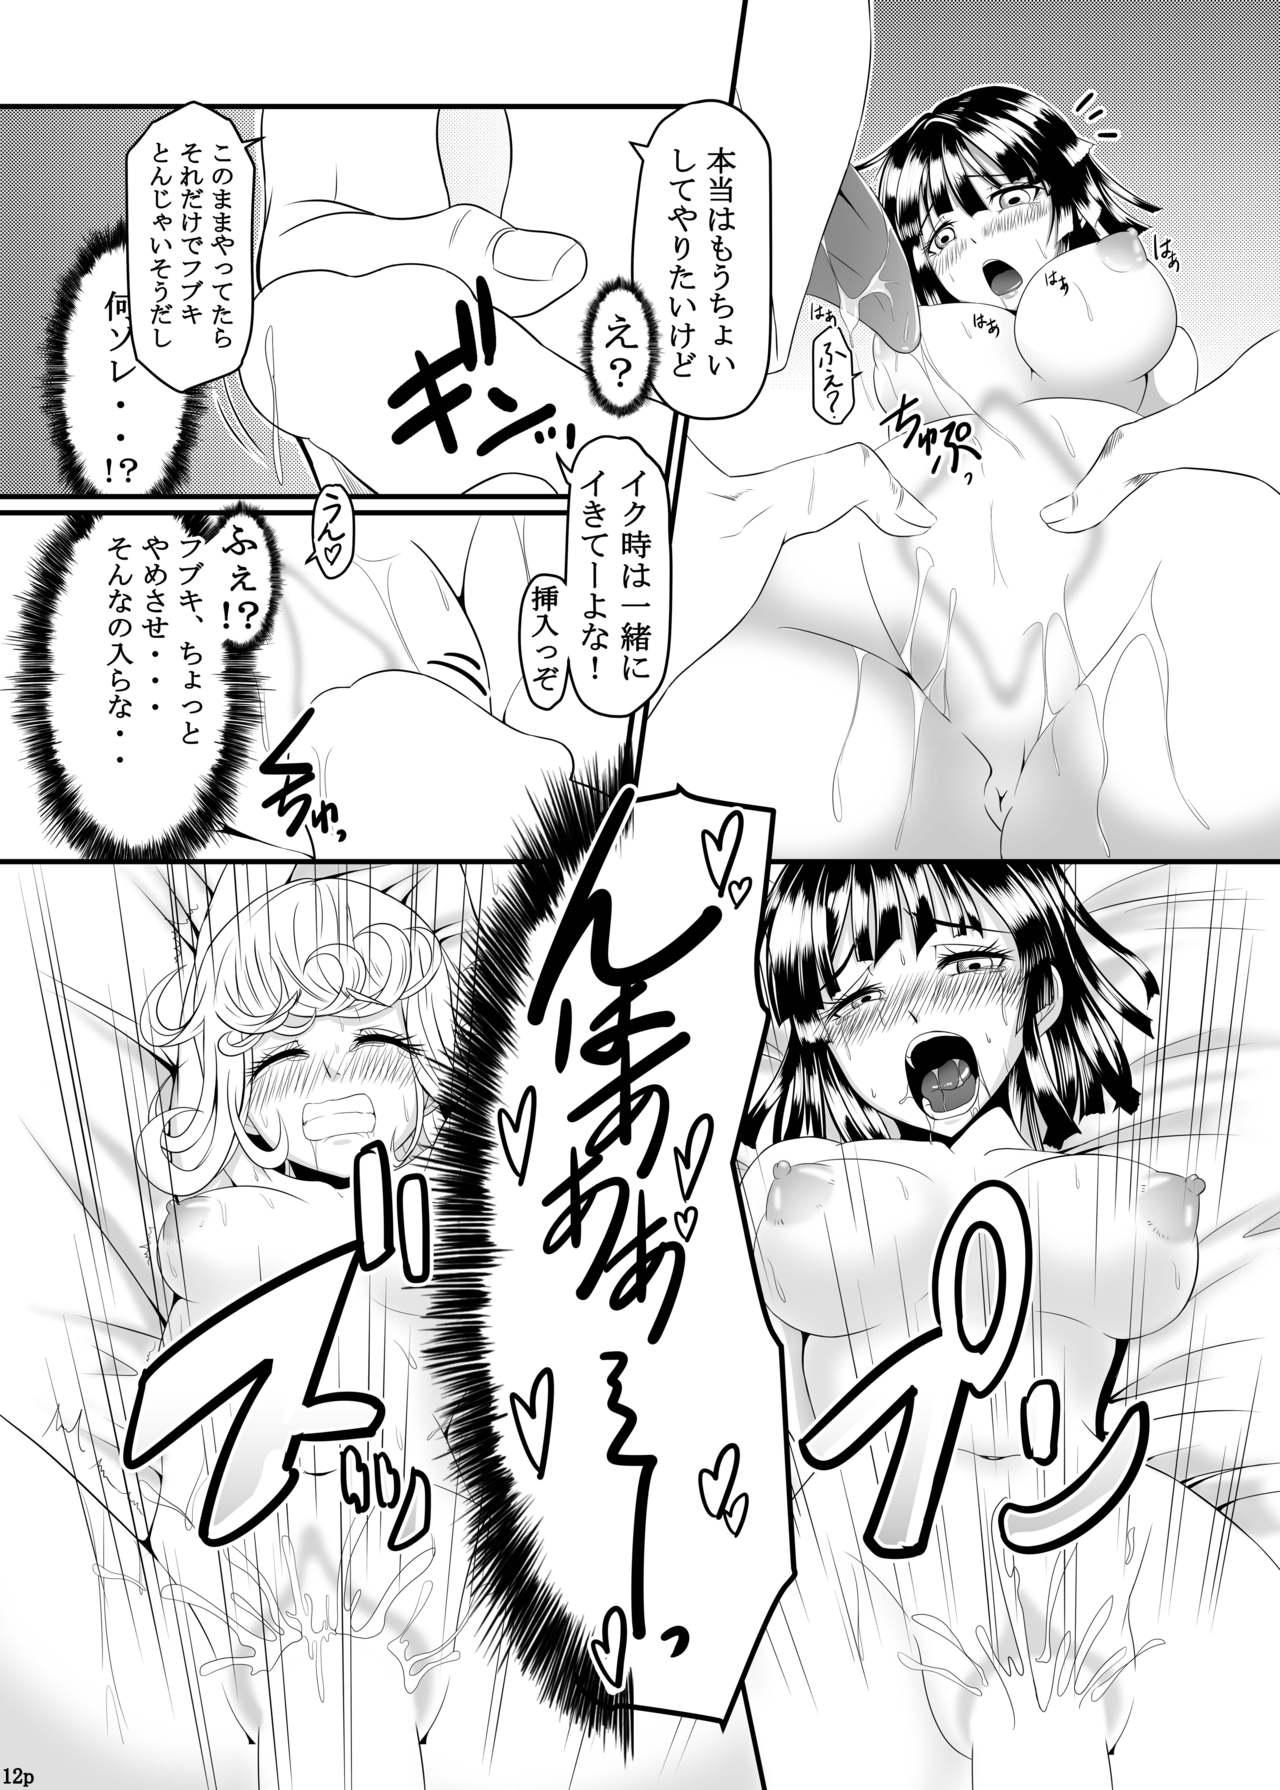 Exposed Dekoboko Love sister - One punch man Tight Cunt - Page 12